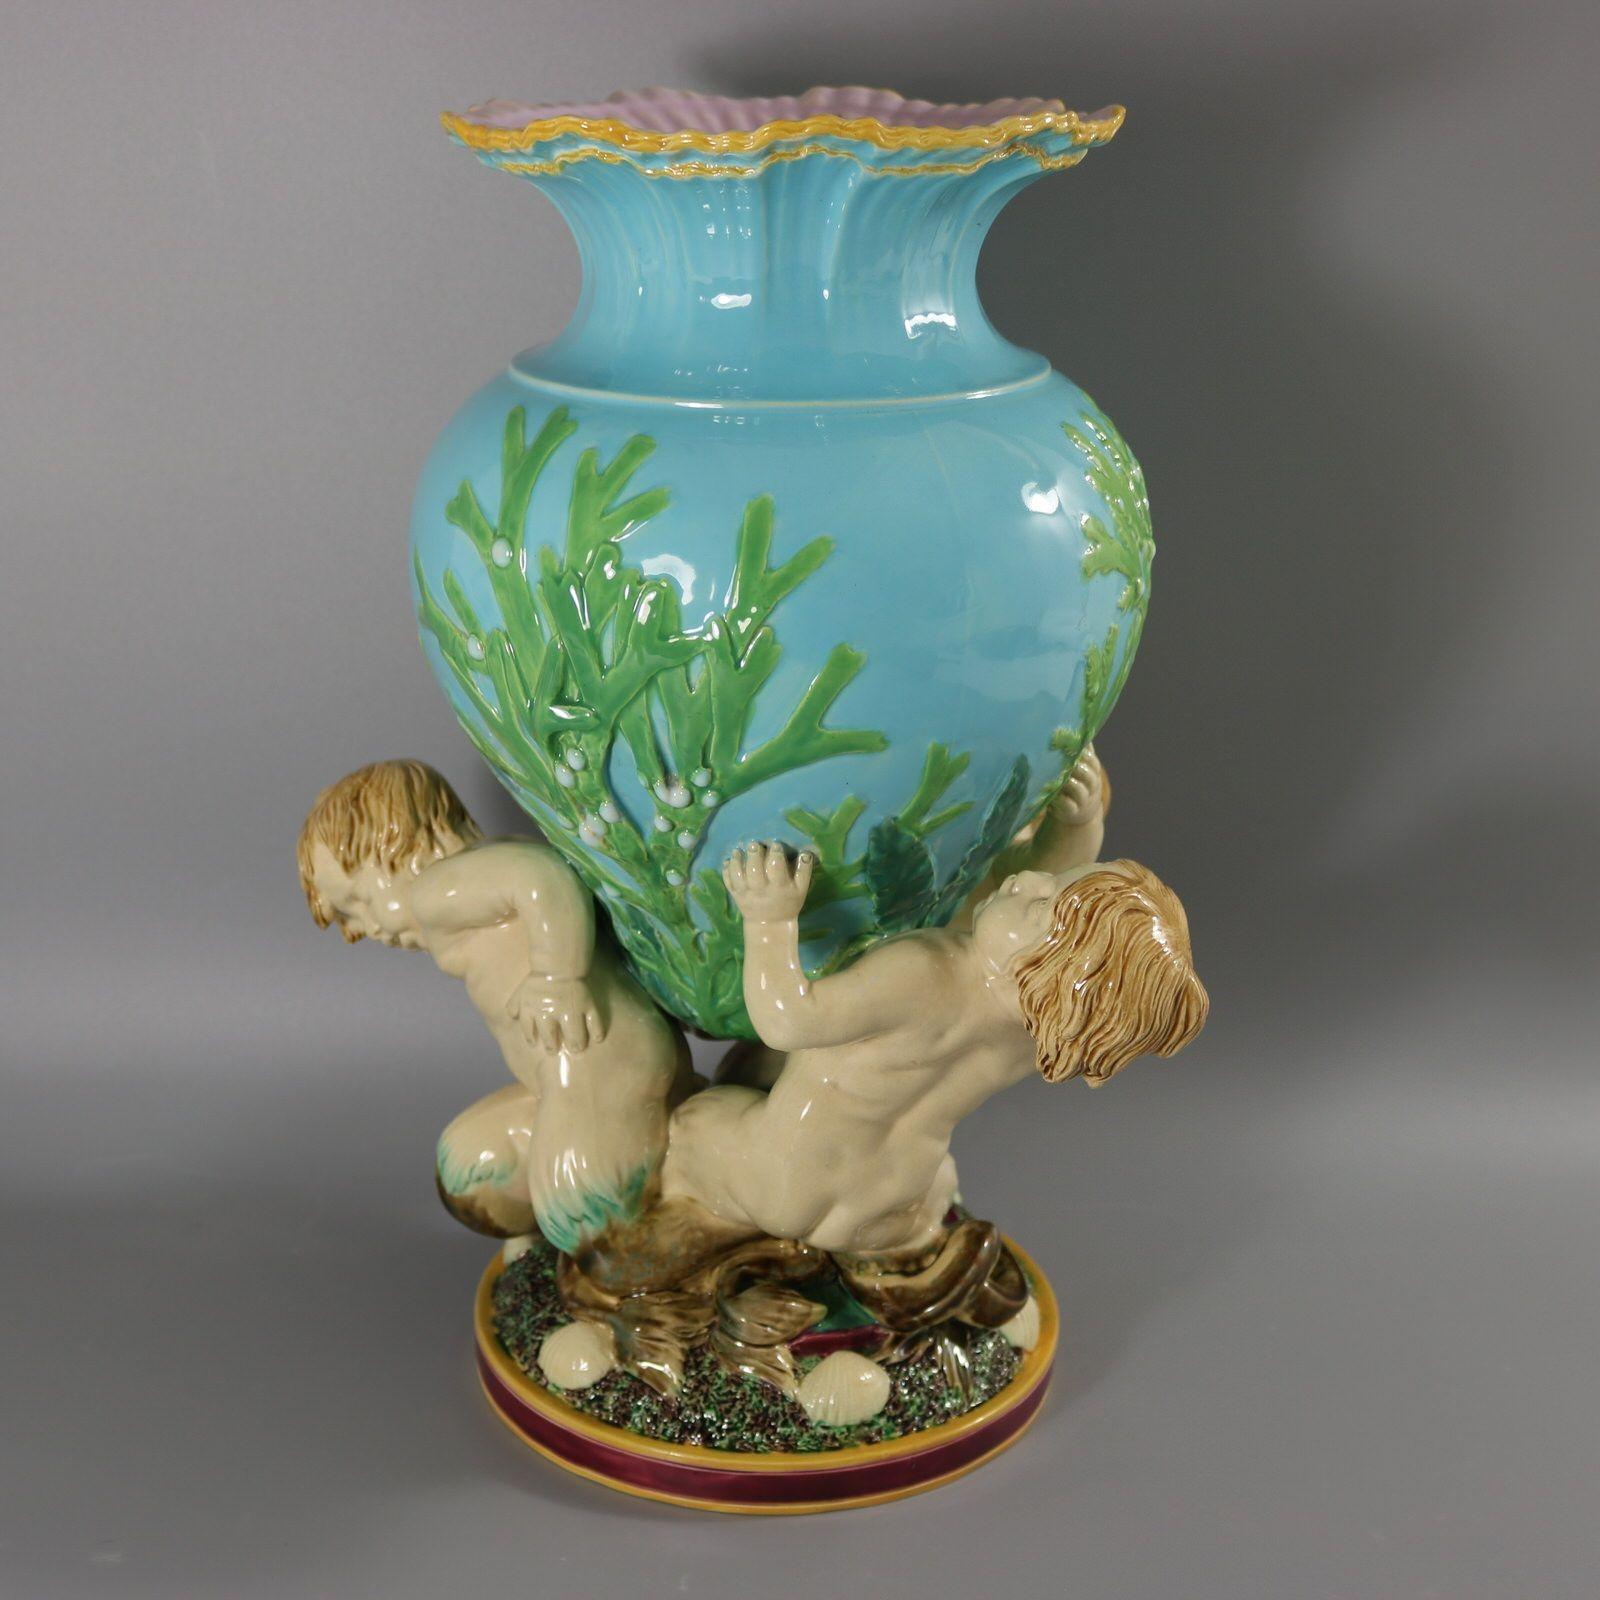 Minton Majolica vase which features three merboys supporting a vessel adorned with seaweeds. The rim of the vase is modelled to depict breaking waves. Turquoise ground version. Colouration: turquoise, green, cream, are predominant. The piece bears